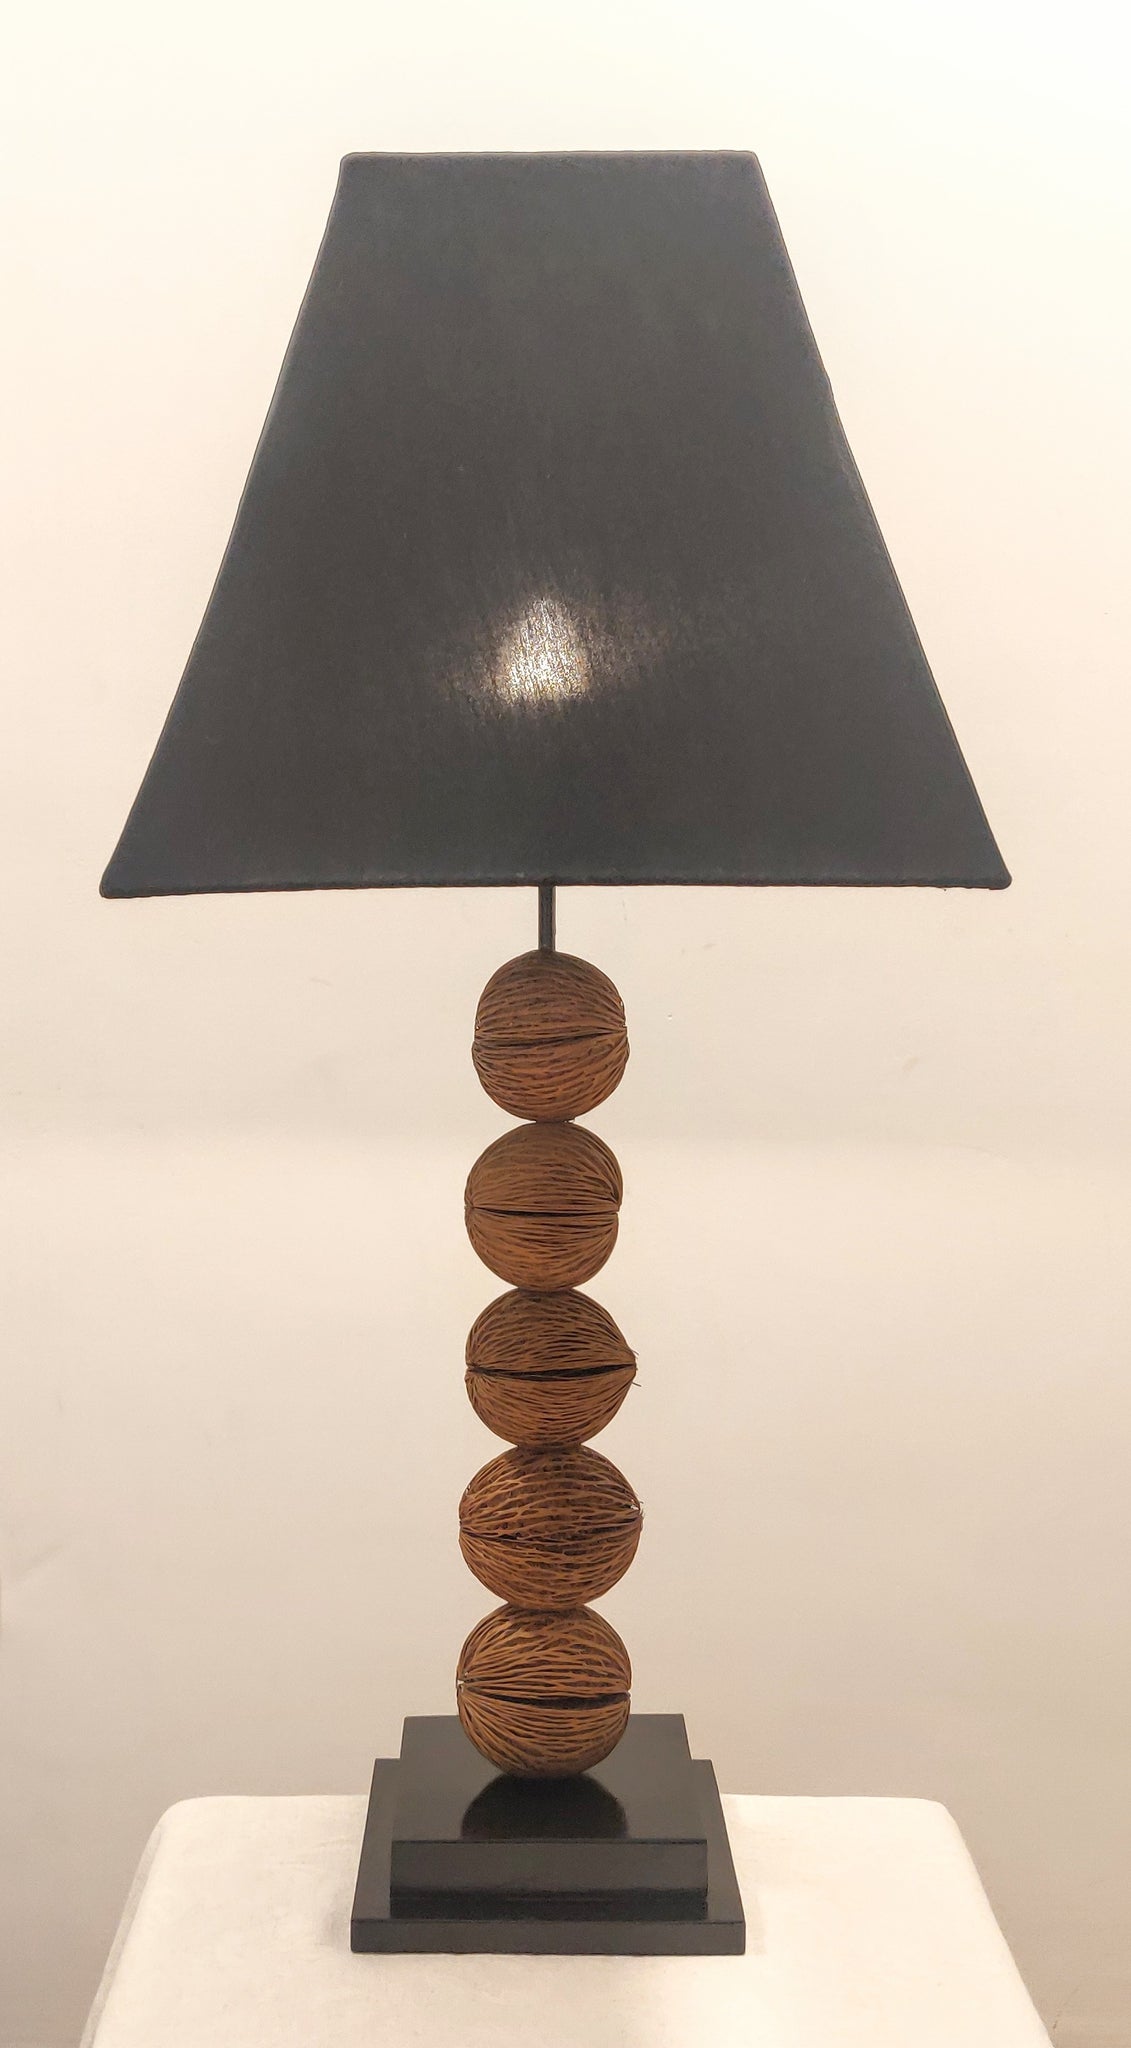 Home Decor: Lighting fixture. Beautiful Table lamp with